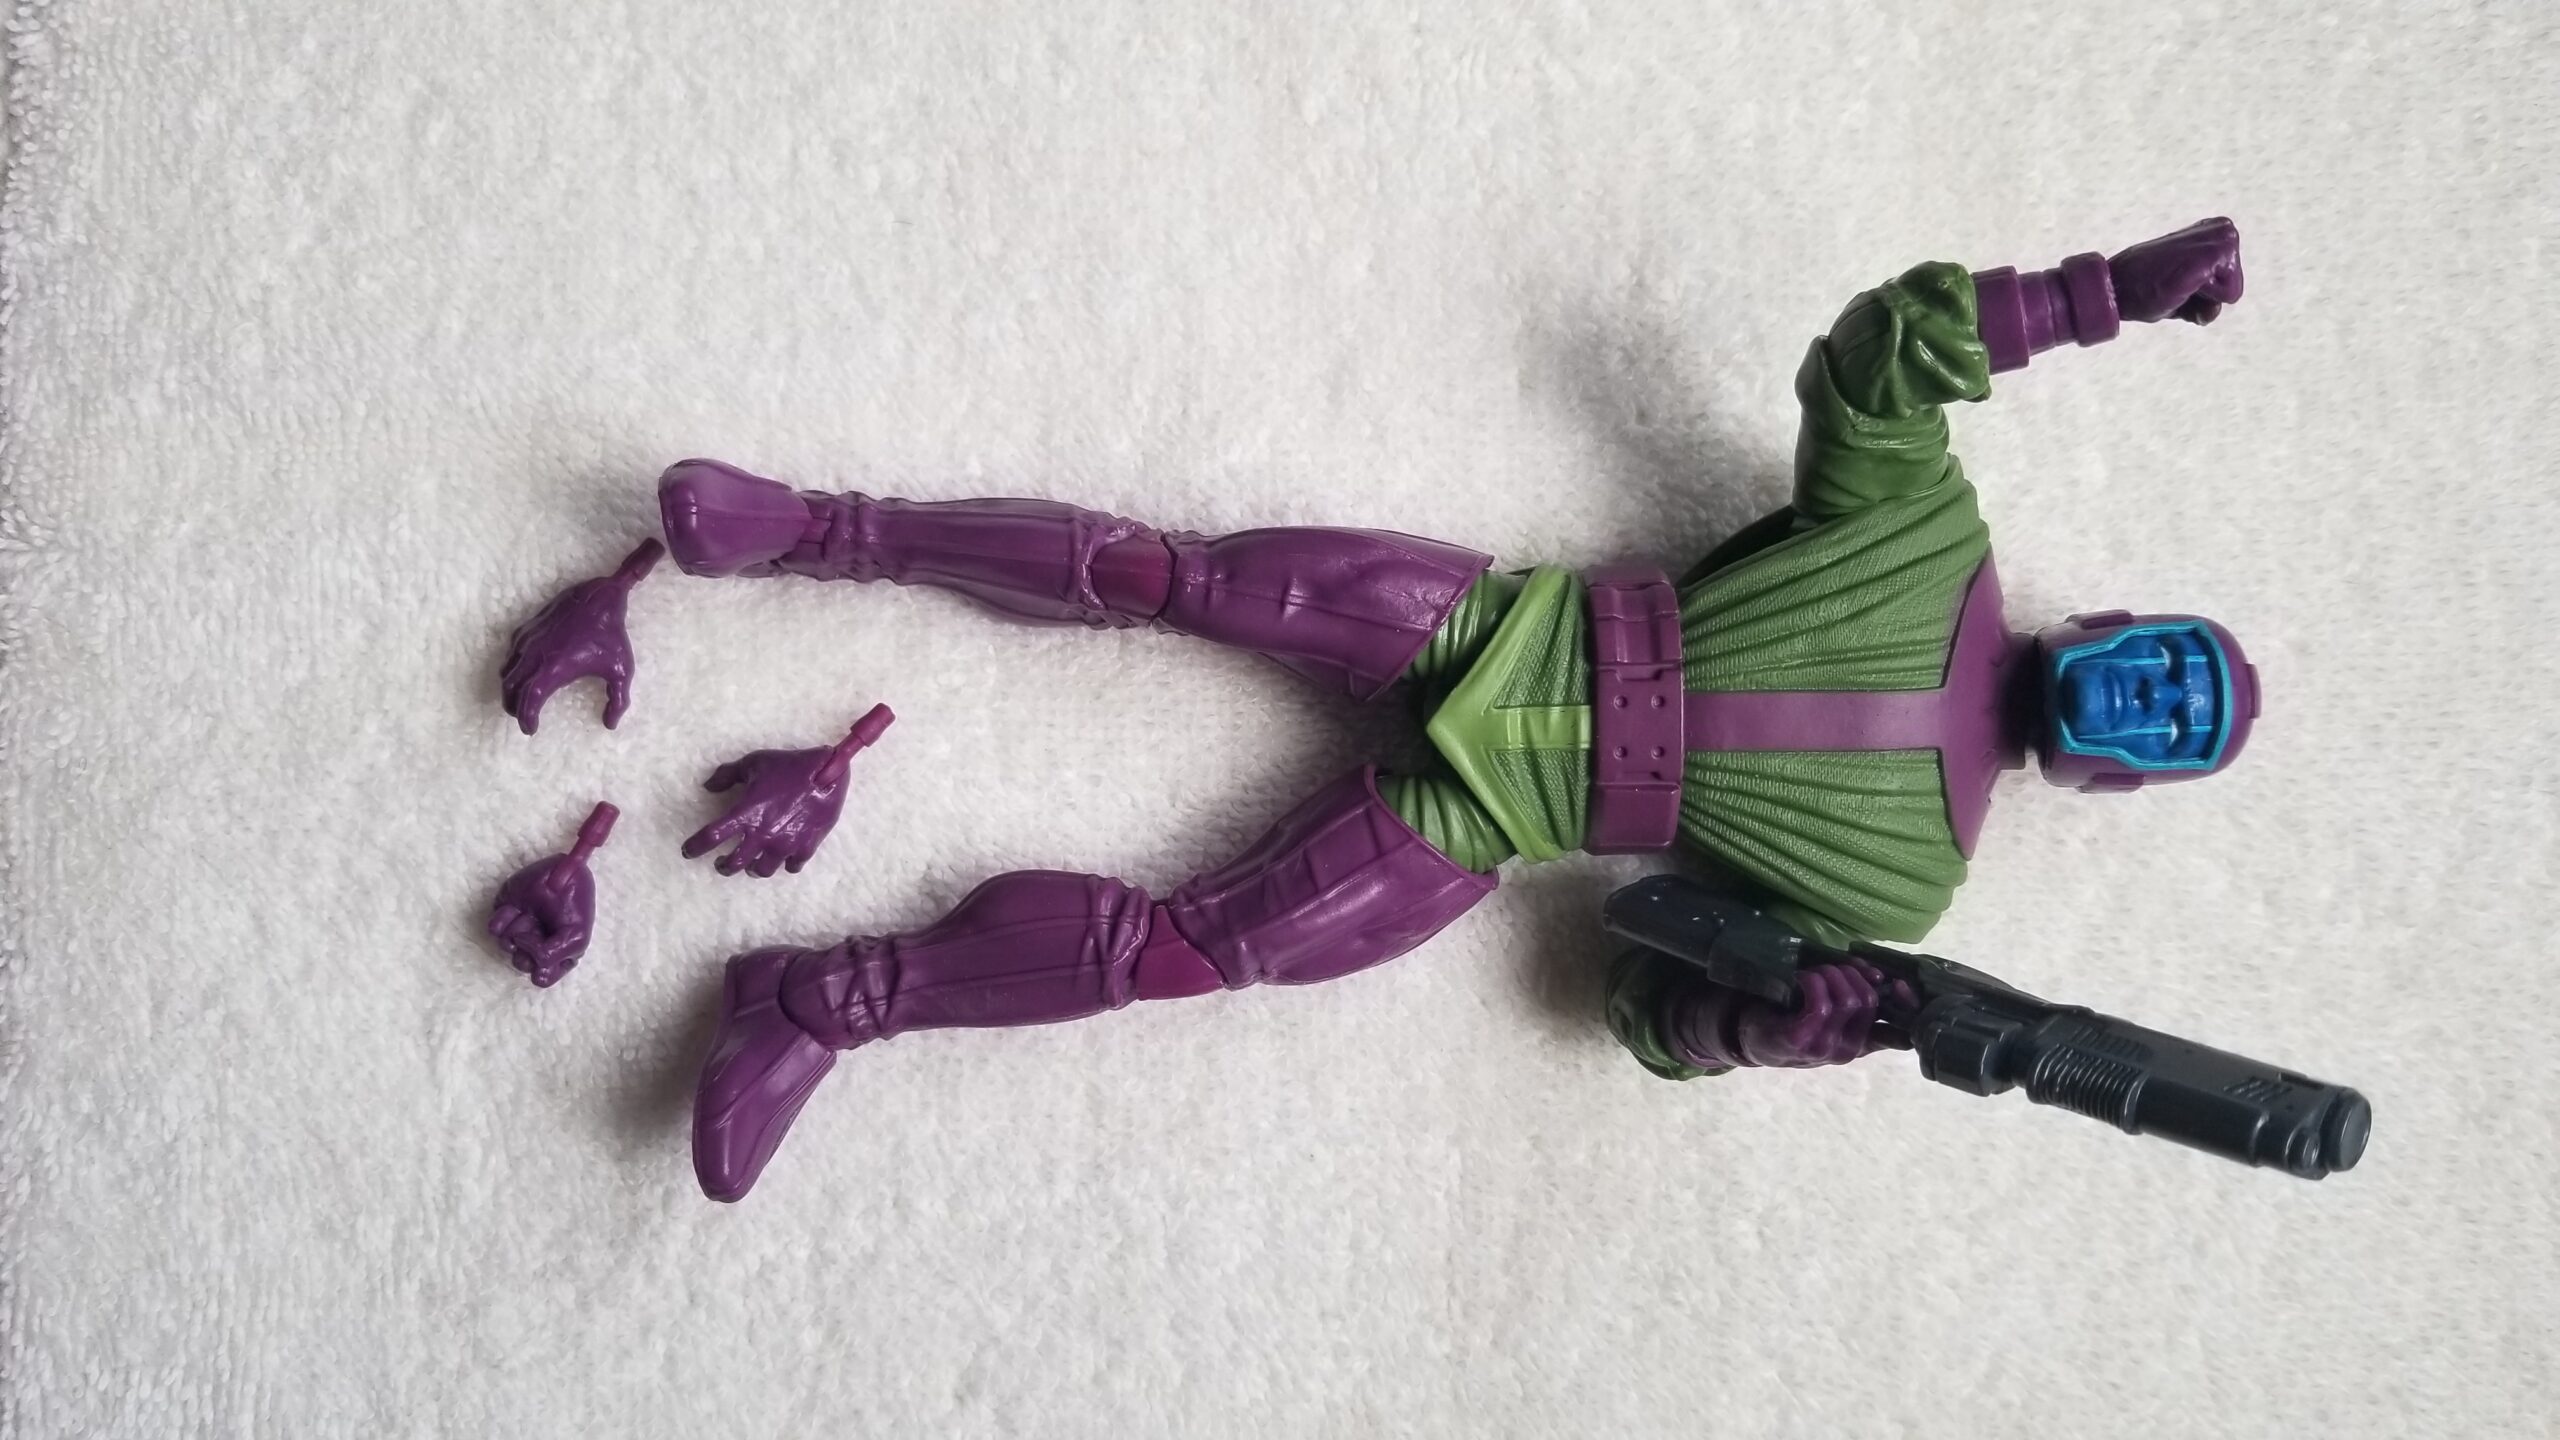 Toy Review: Kang the Conqueror - Geekosity